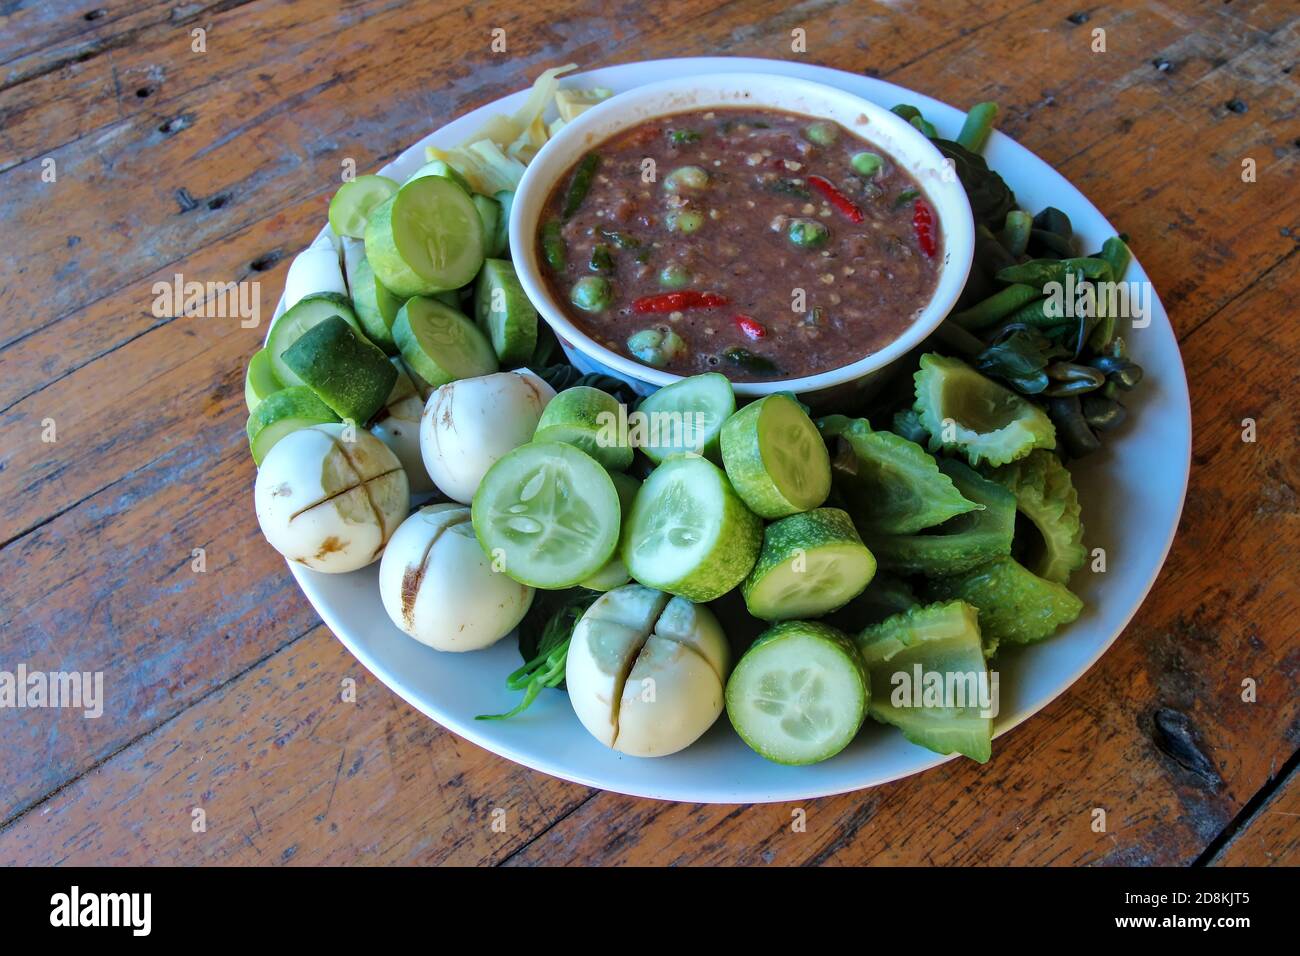 Shrimp Paste Chili Paste, eaten with vegetables. There are fresh vegetables and boiled vegetables, the food that Thais eat often Stock Photo